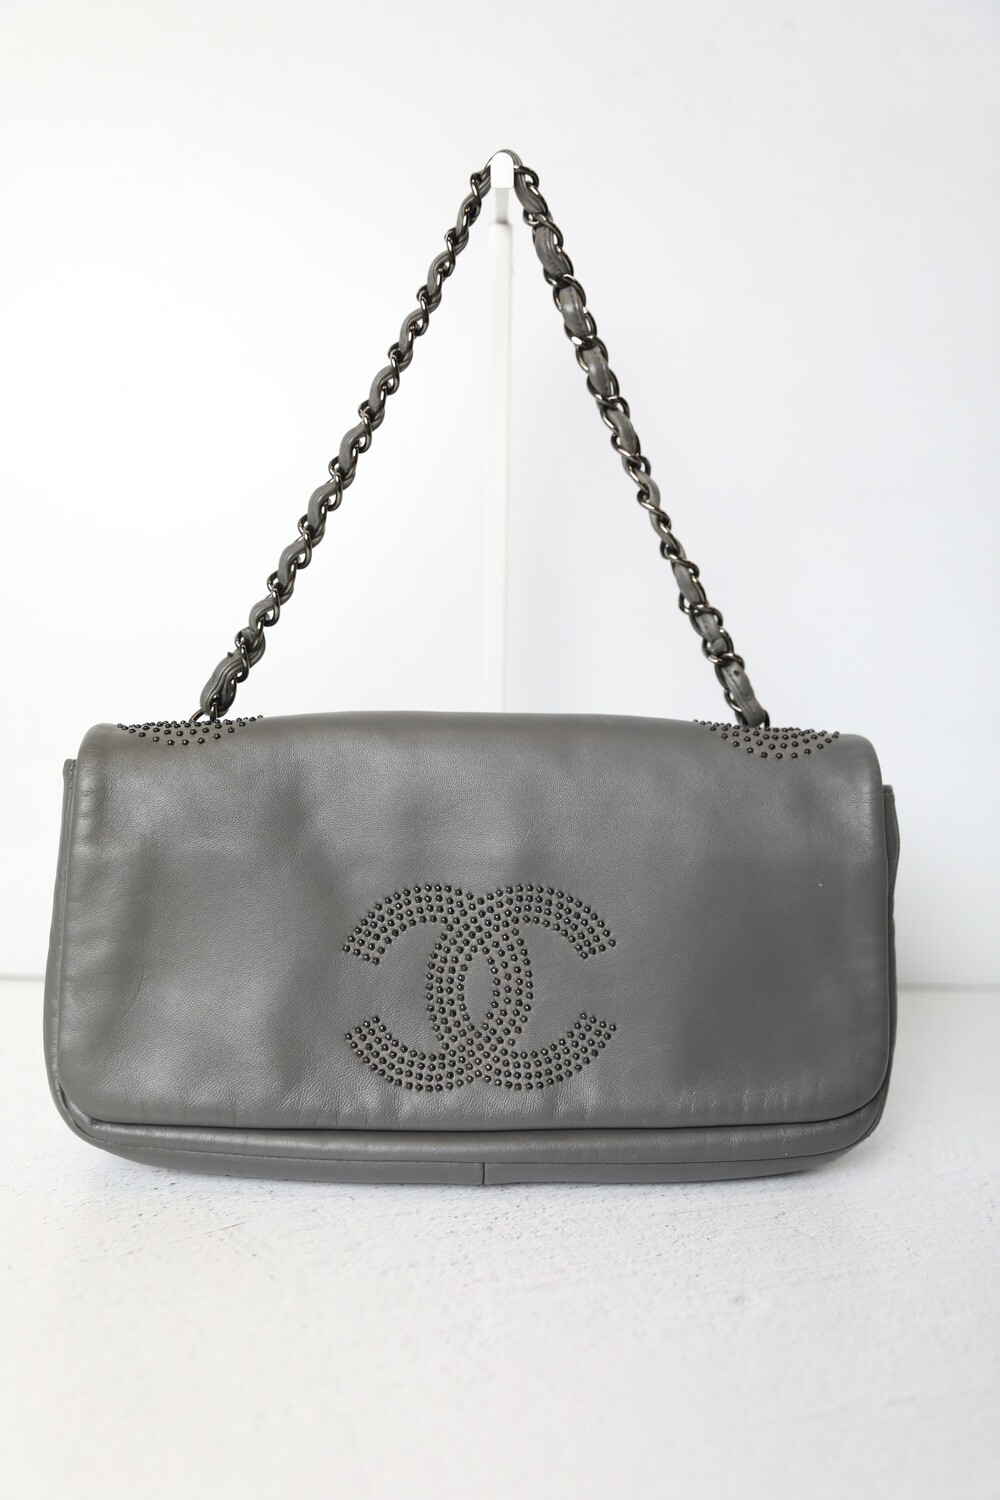 Chanel CC Studded Flap Shoulder Bag, Grey Leather with Shiny